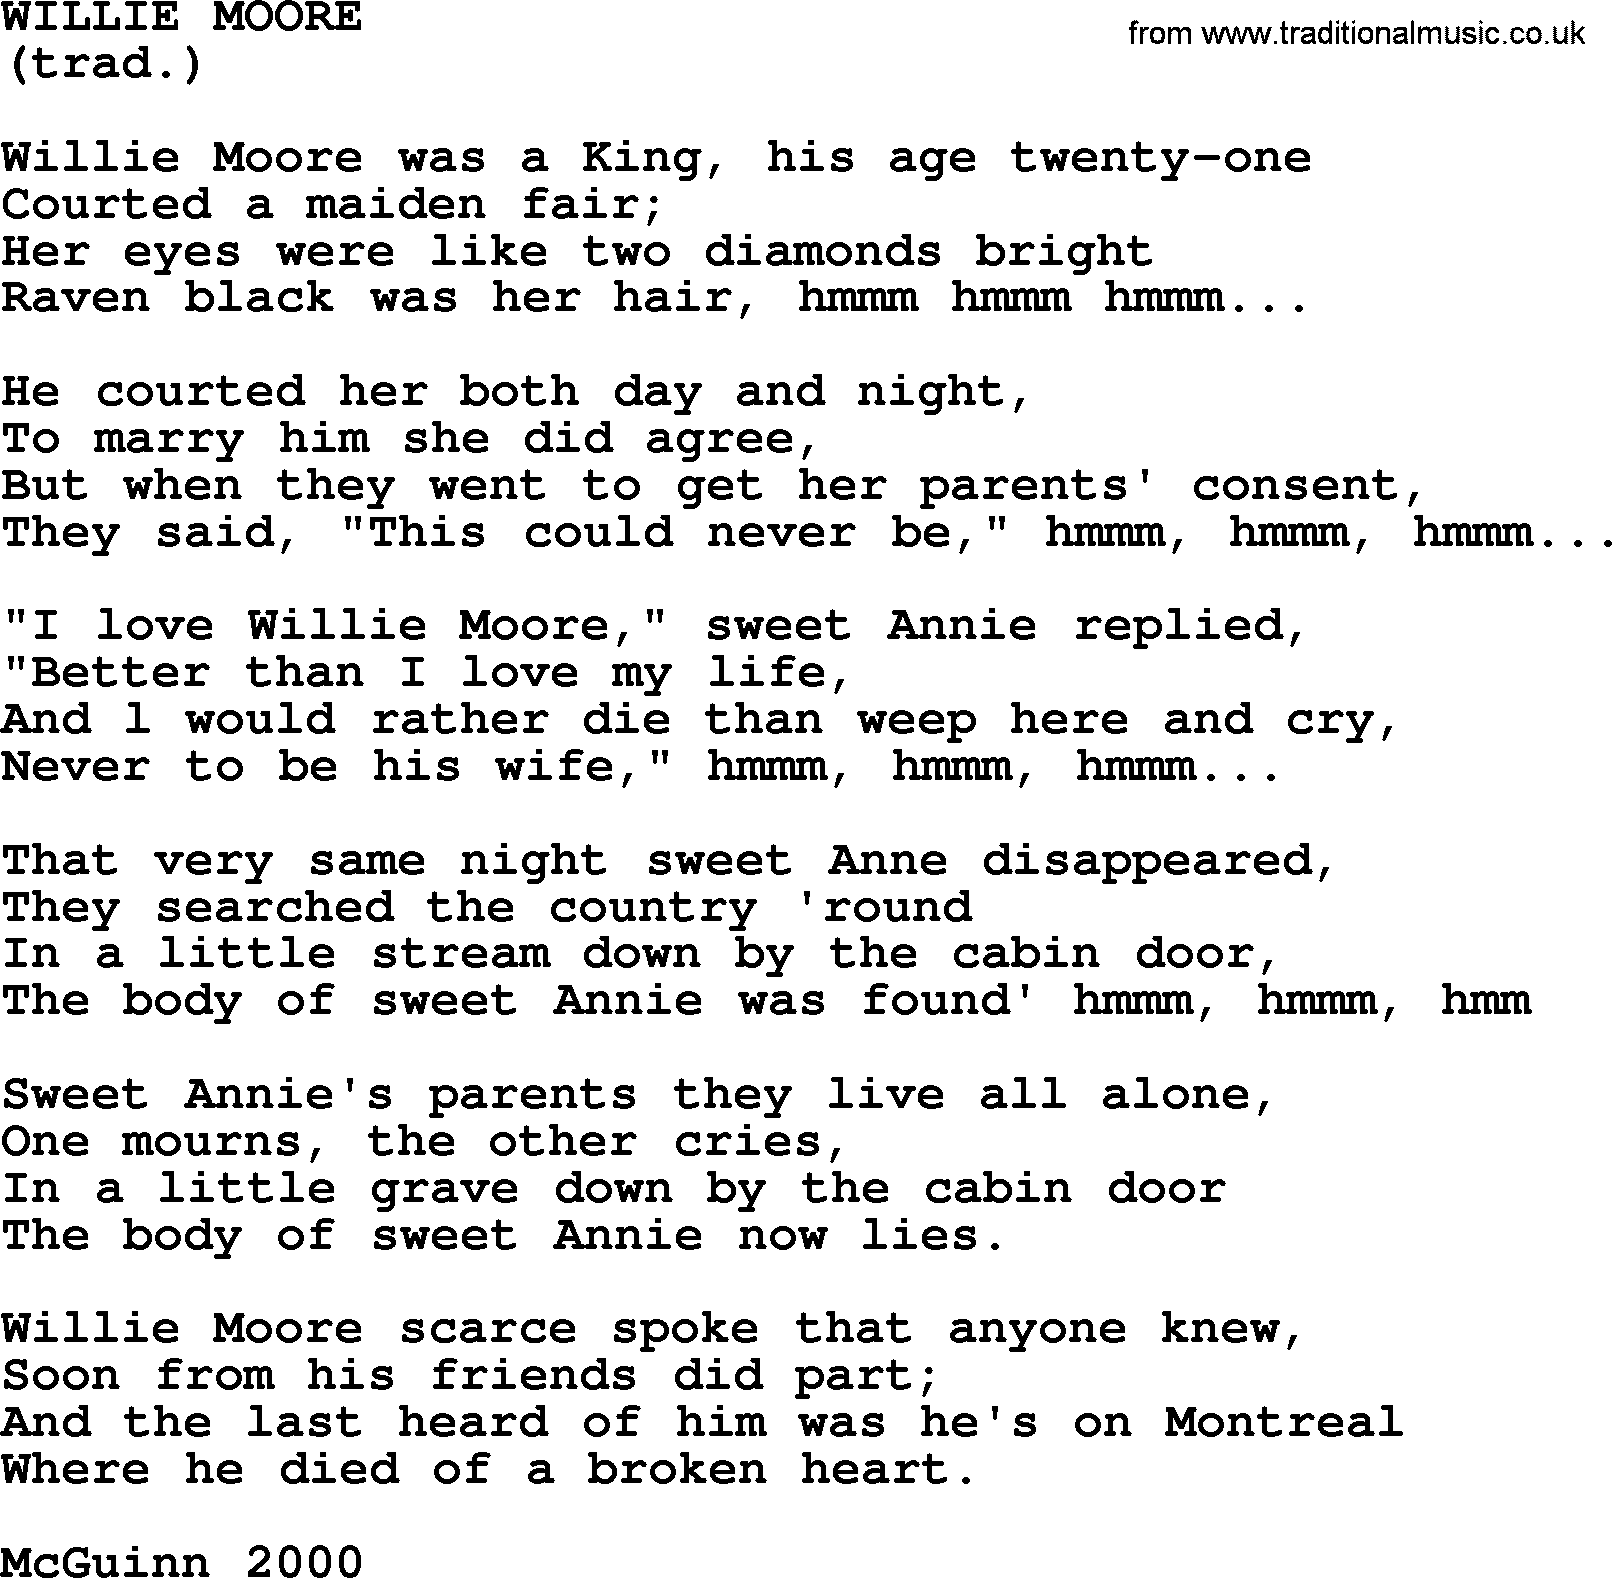 The Byrds song Willie Moore, lyrics